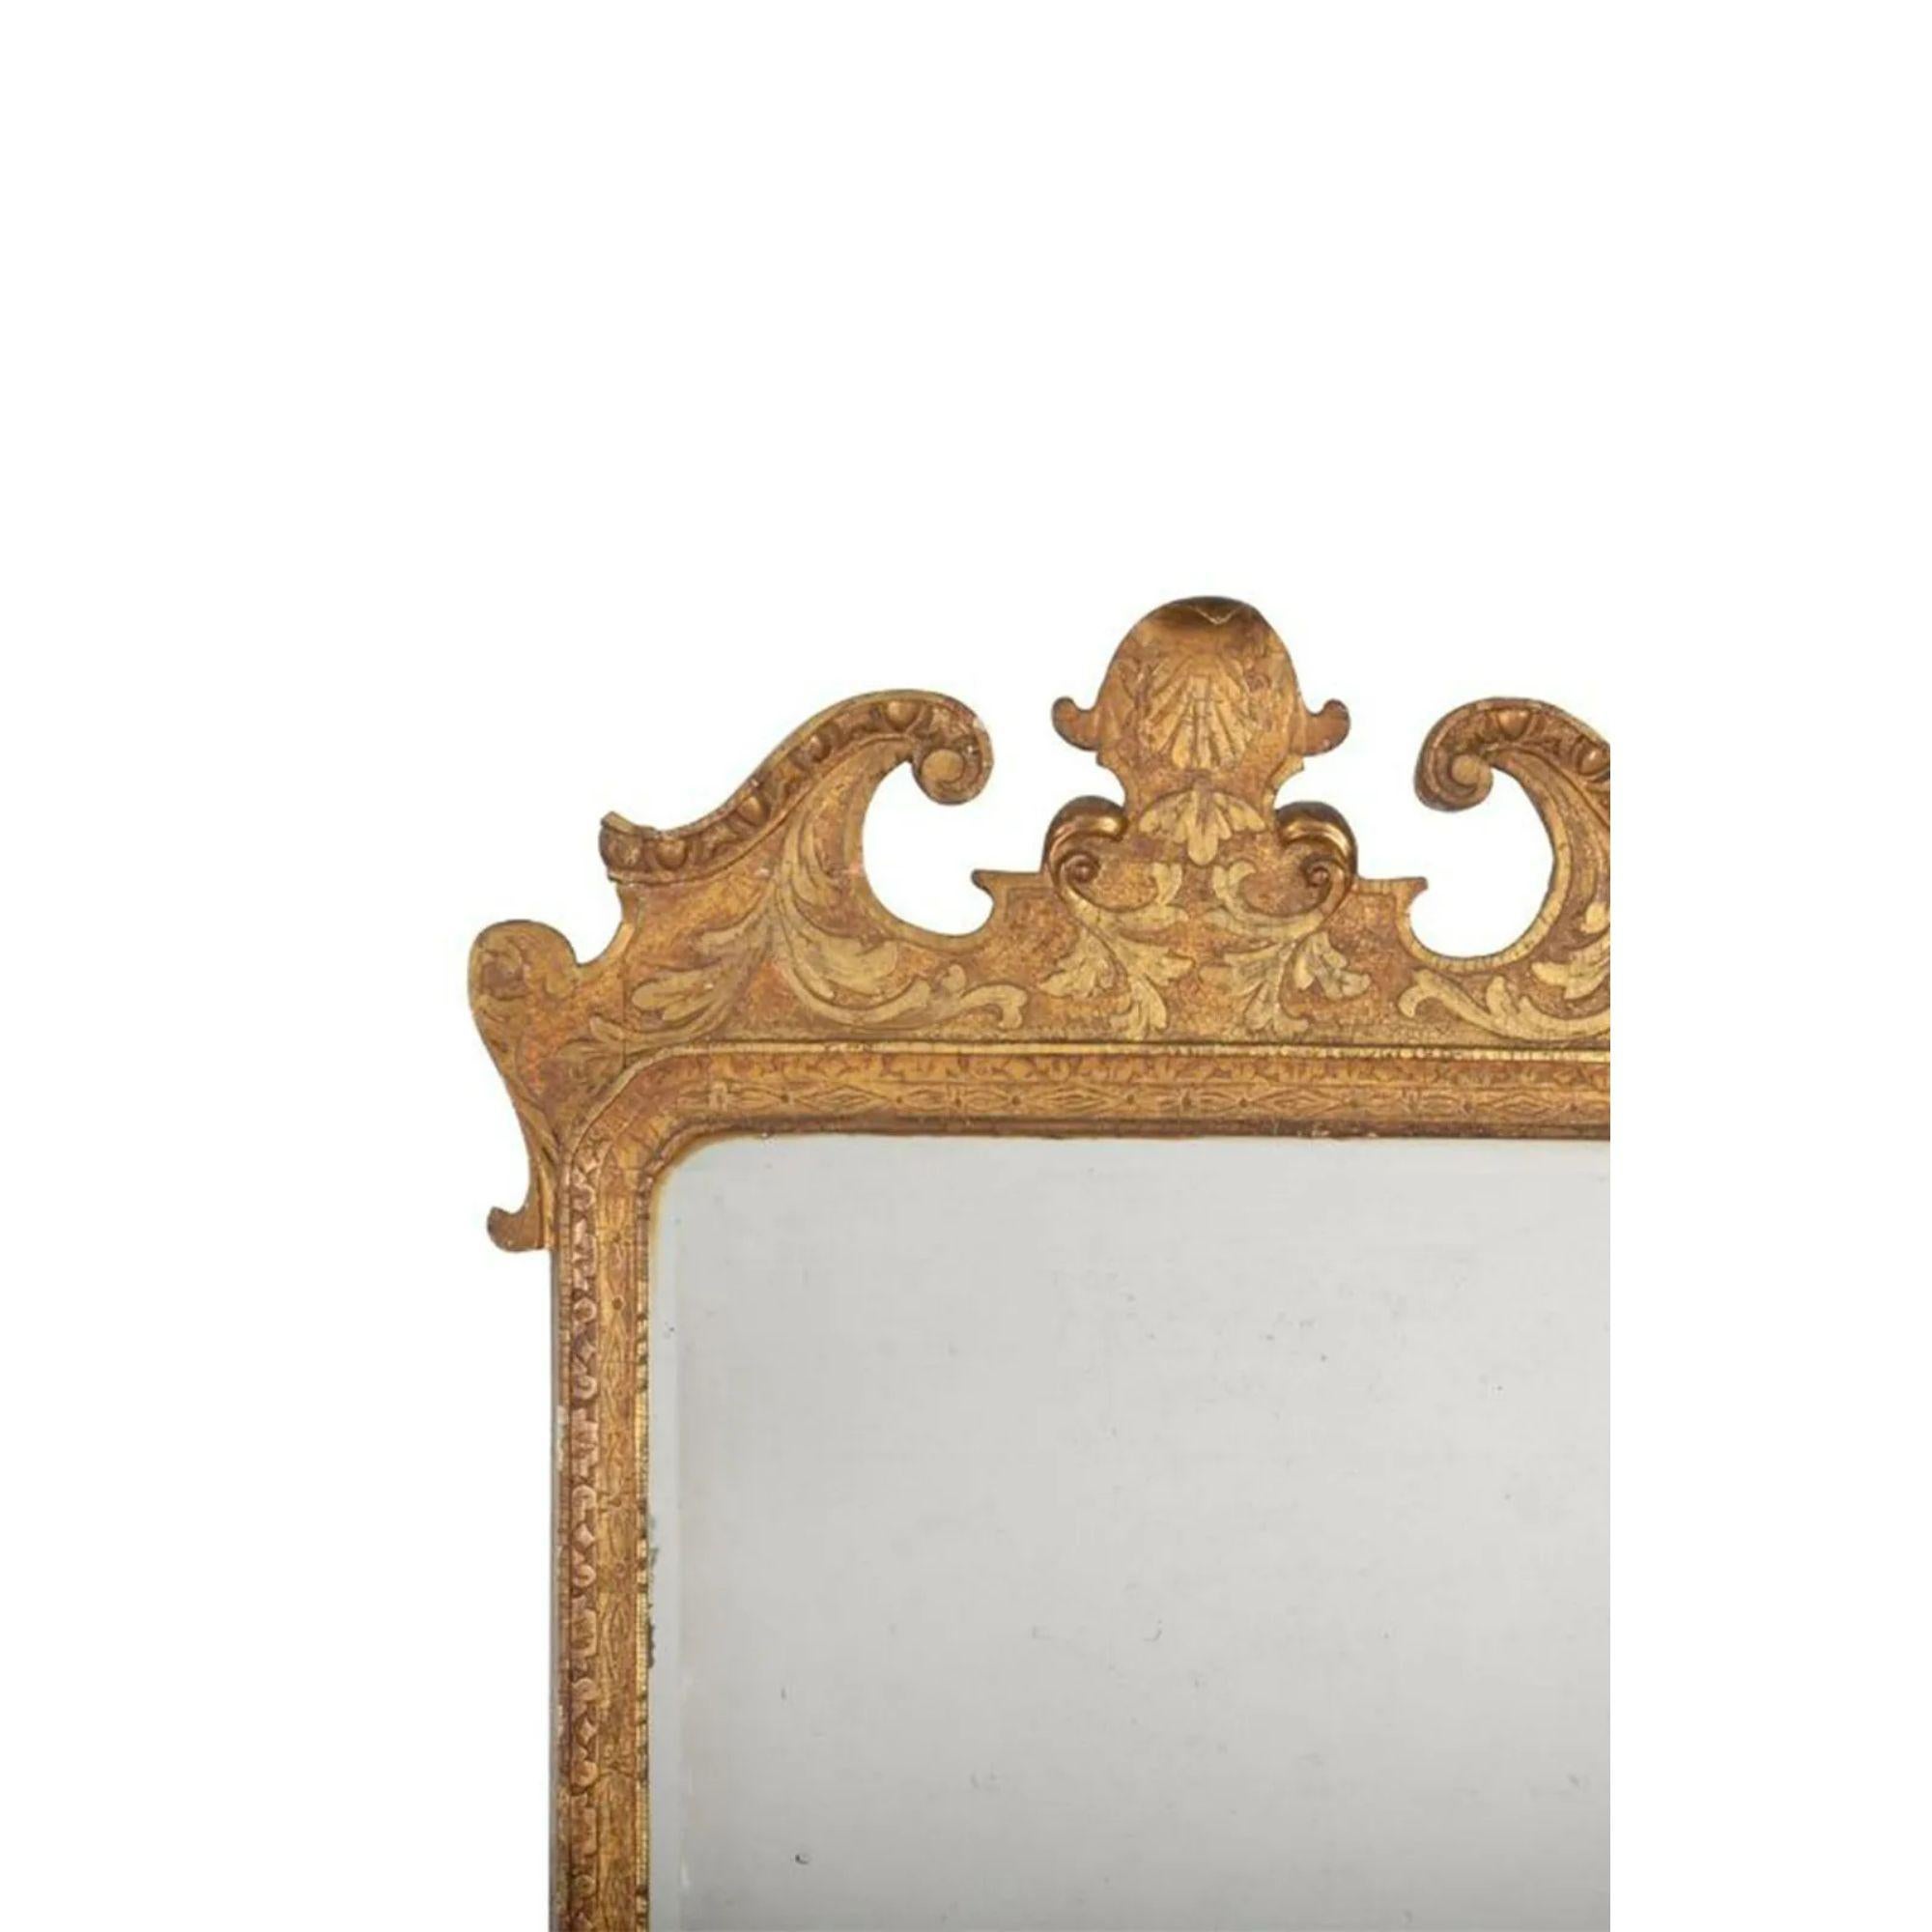 George II Giltwood mirror, circa 1735

The rectangular bevelled plate is set within a geometric-carved border, surmounted by an acanthus-carved broken pediment centred by a foliate cartouche with scallop shell decoration. The apron is decorated